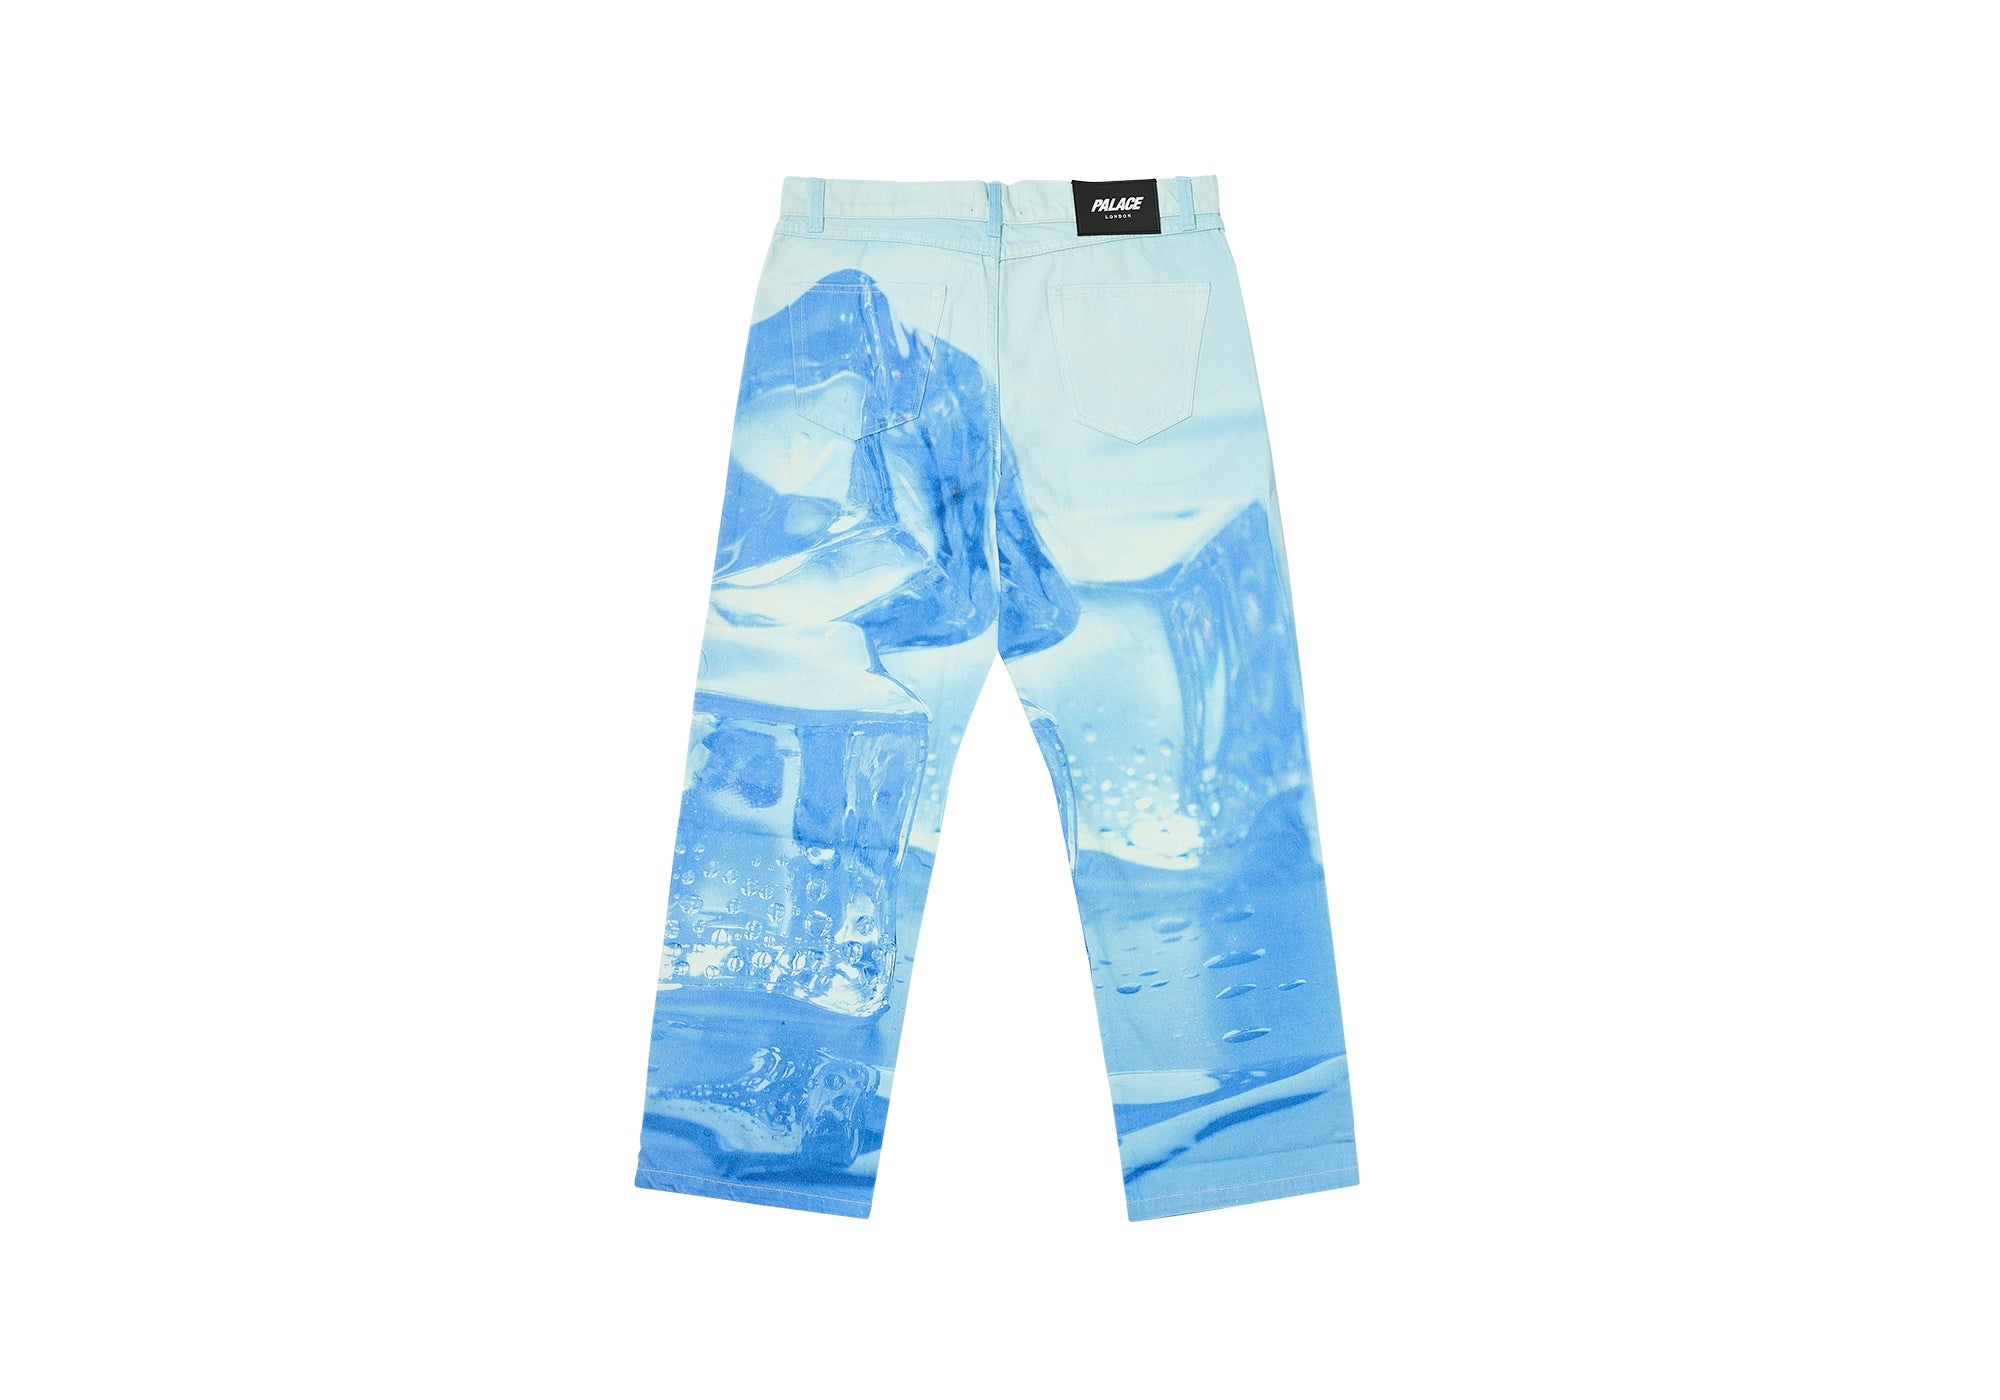 ULTIMATE CHILL BAGGIER JEAN CRYSTALISED BLUE - 2